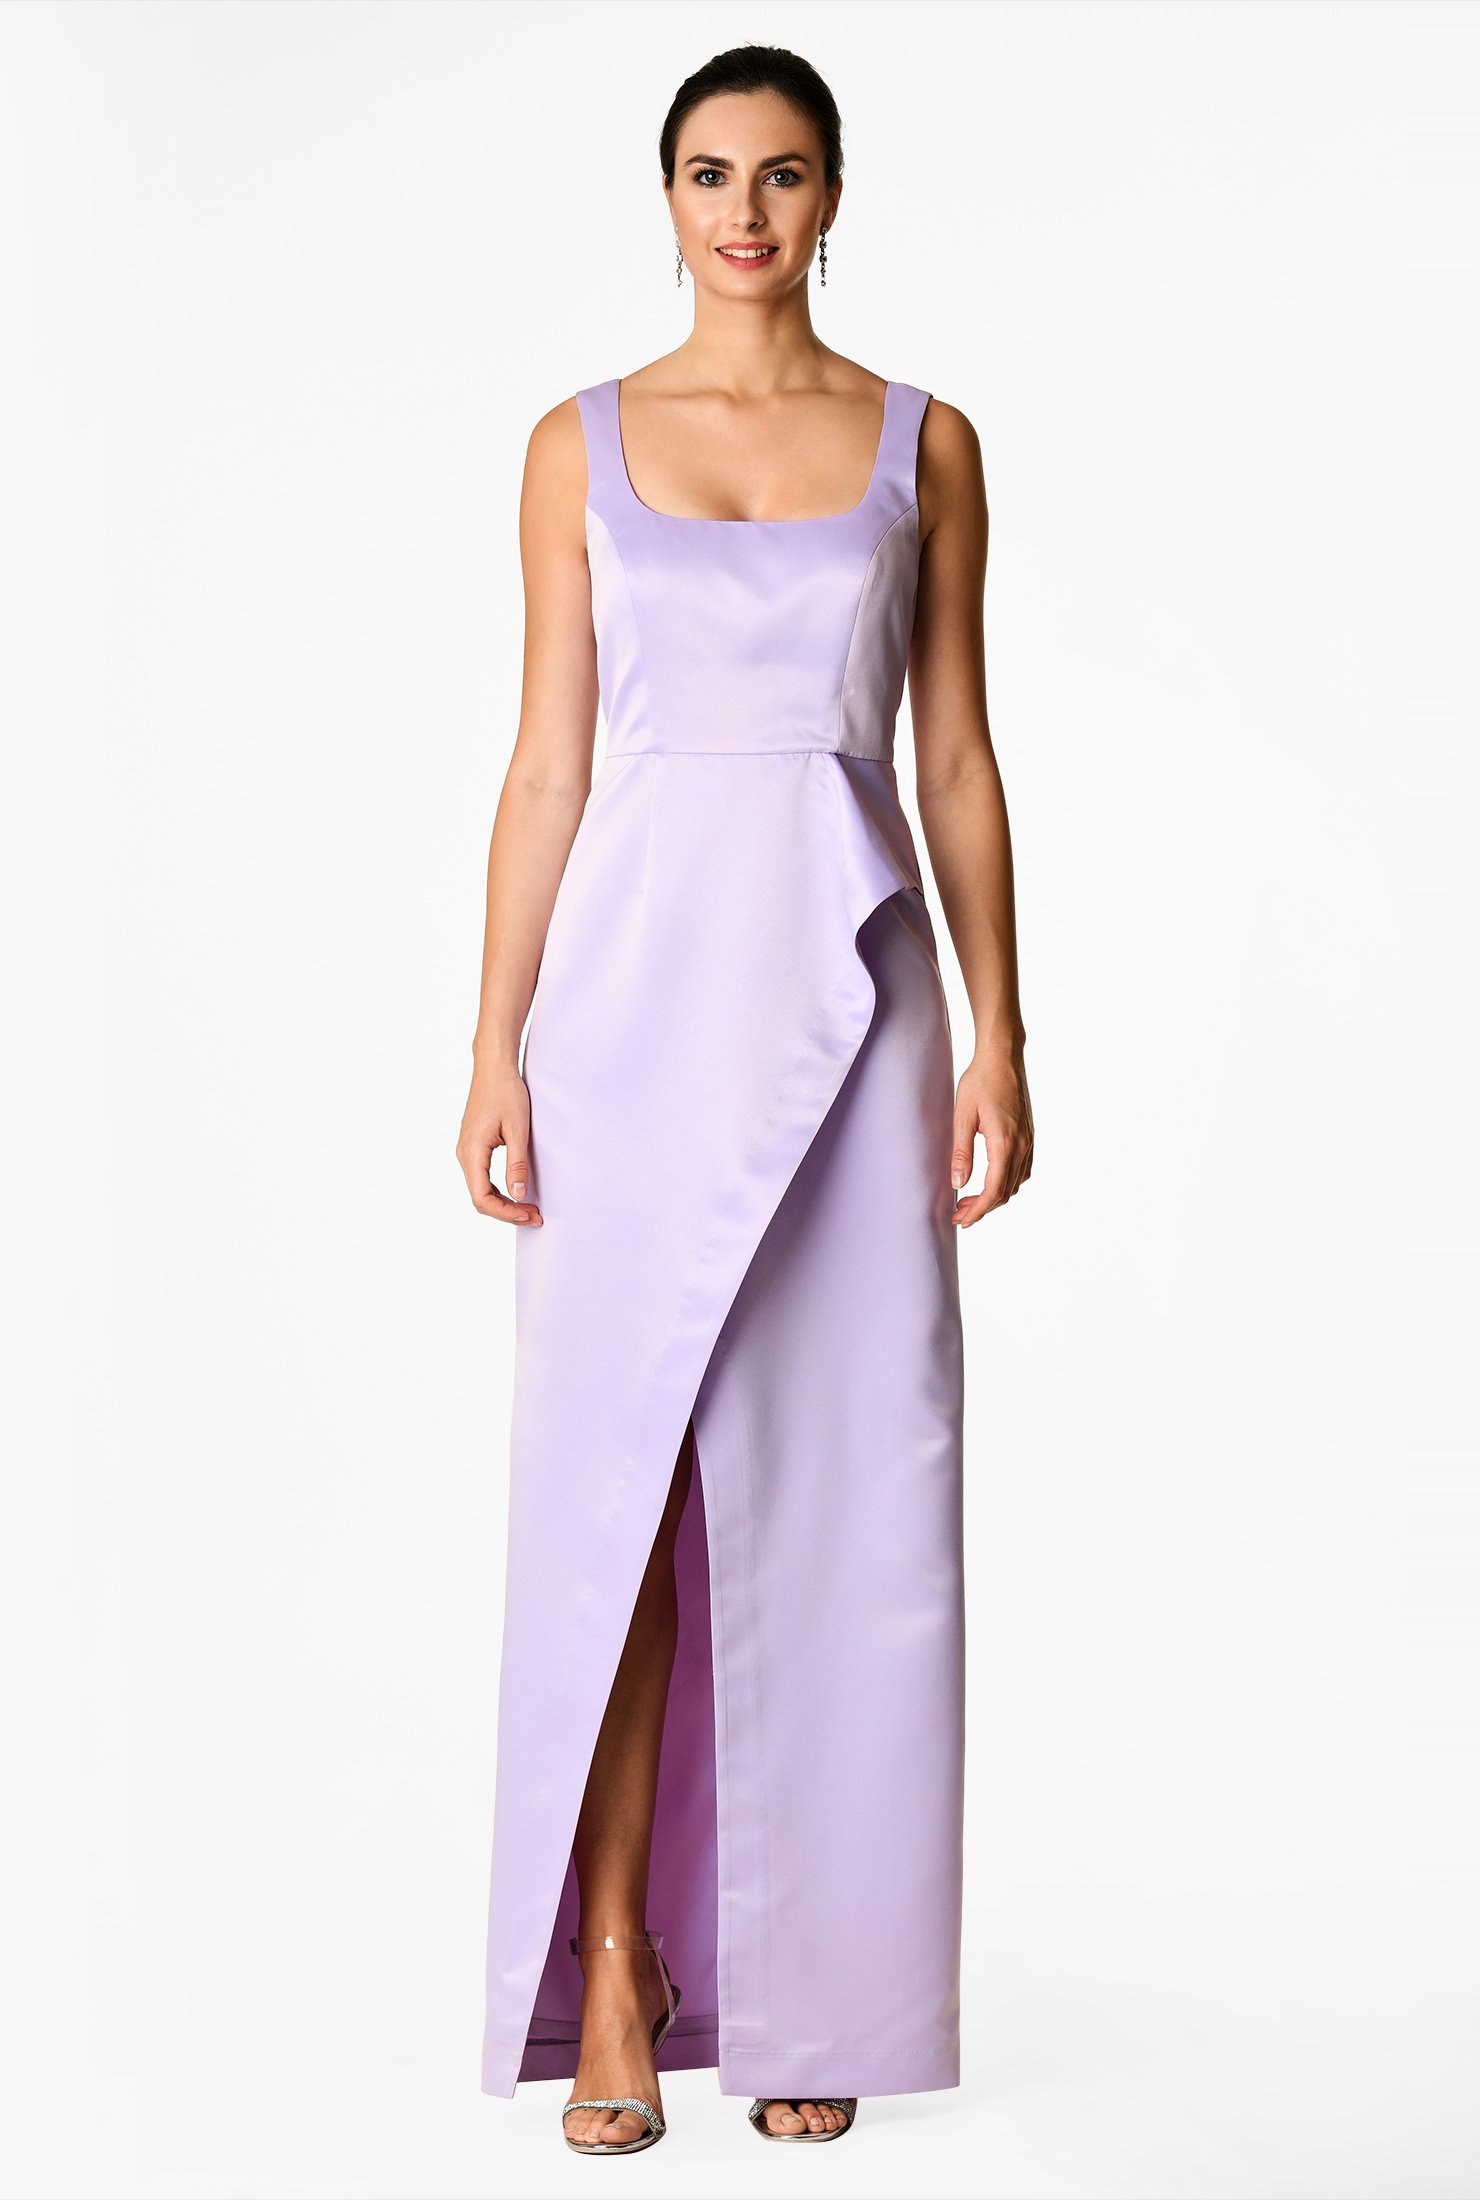 A-line styling sculpts flattering shape in our satin dress detailed with a square neck and a ruffle drape front which angles down the skirt for a flirty show of leg.